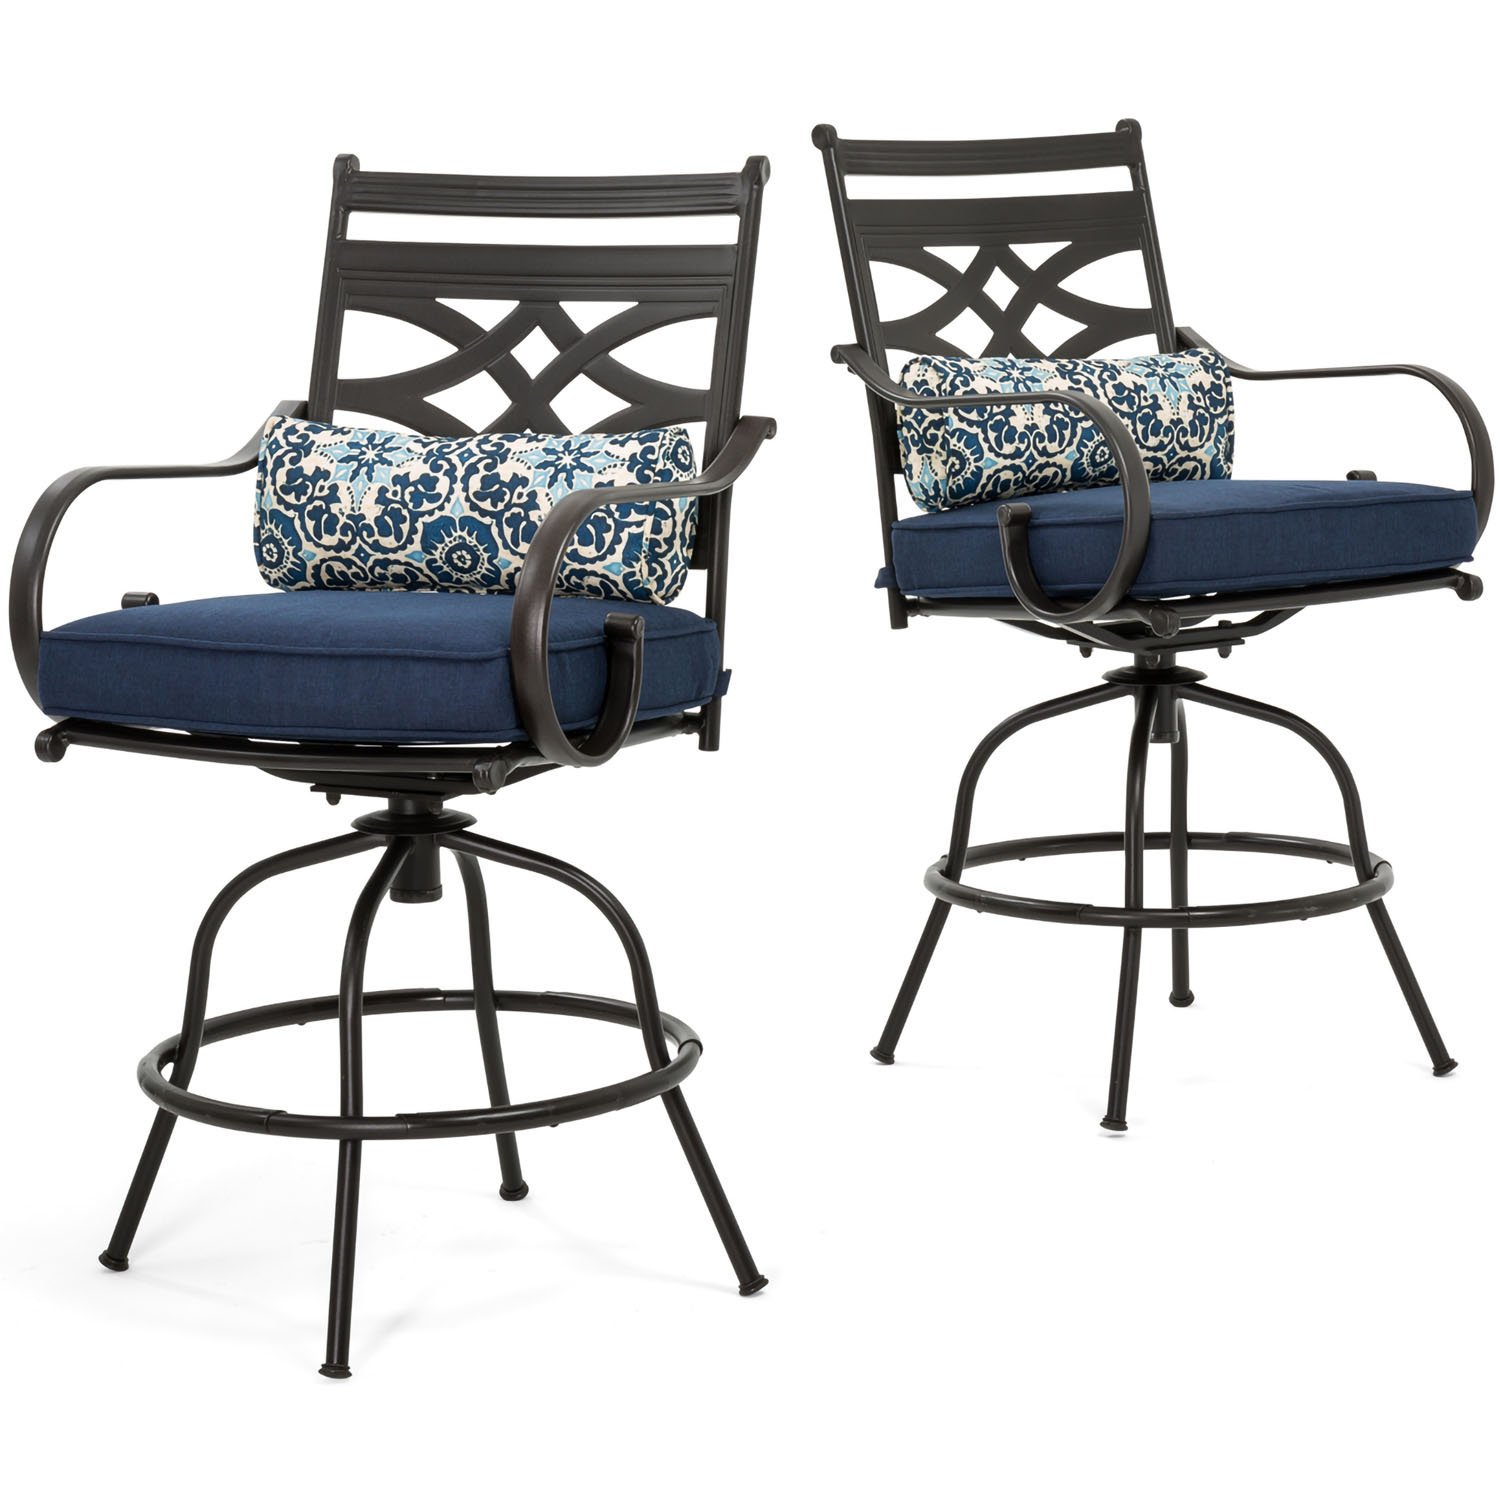 Hanover Montclair 5-Piece Steel Outdoor Counter-Height Dining Set with Chairs and Table, Seats 4 - image 2 of 12